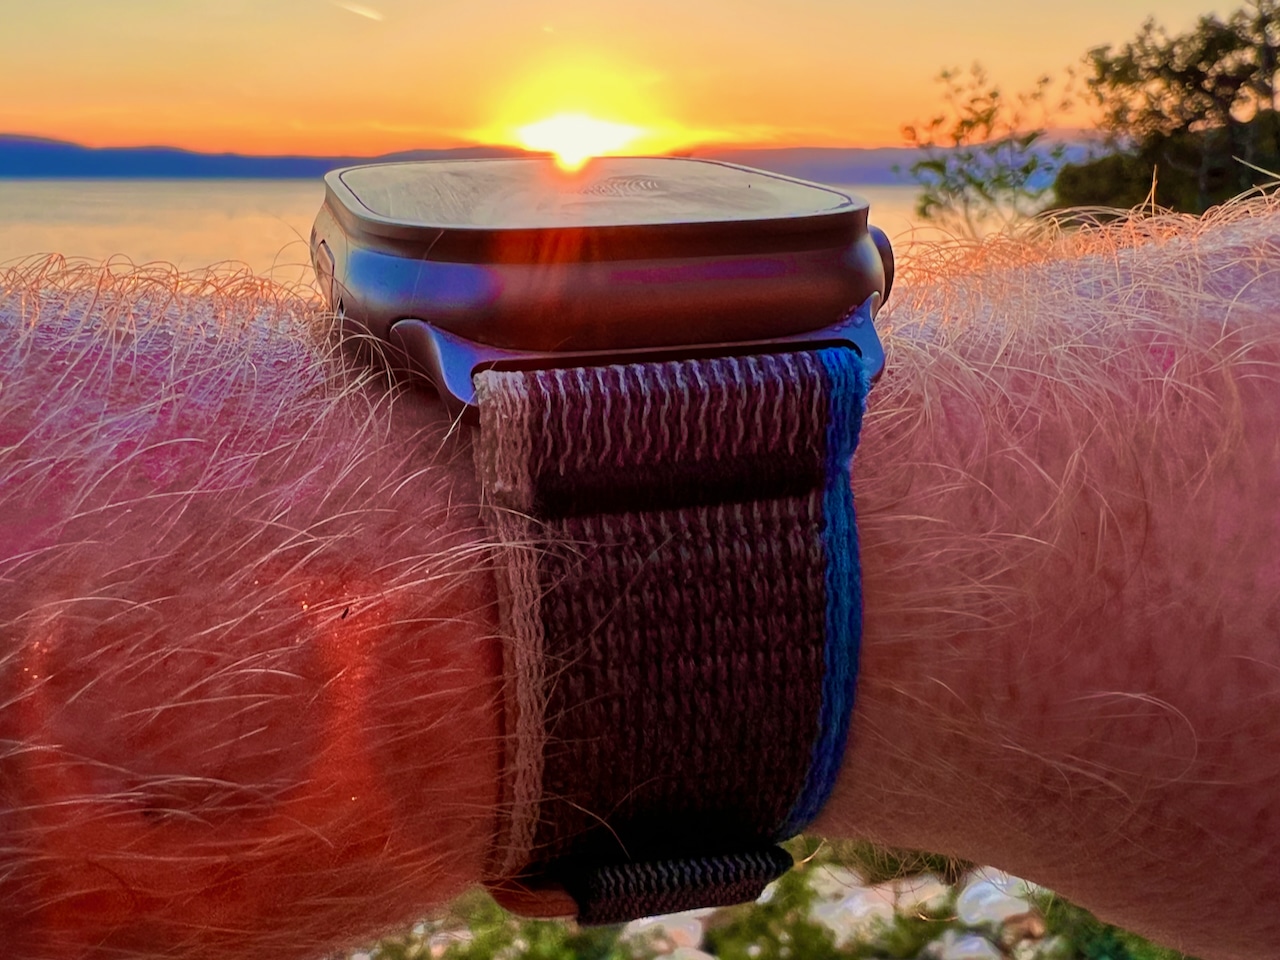 Apple Watch Ultra trail running experiences tips experience report